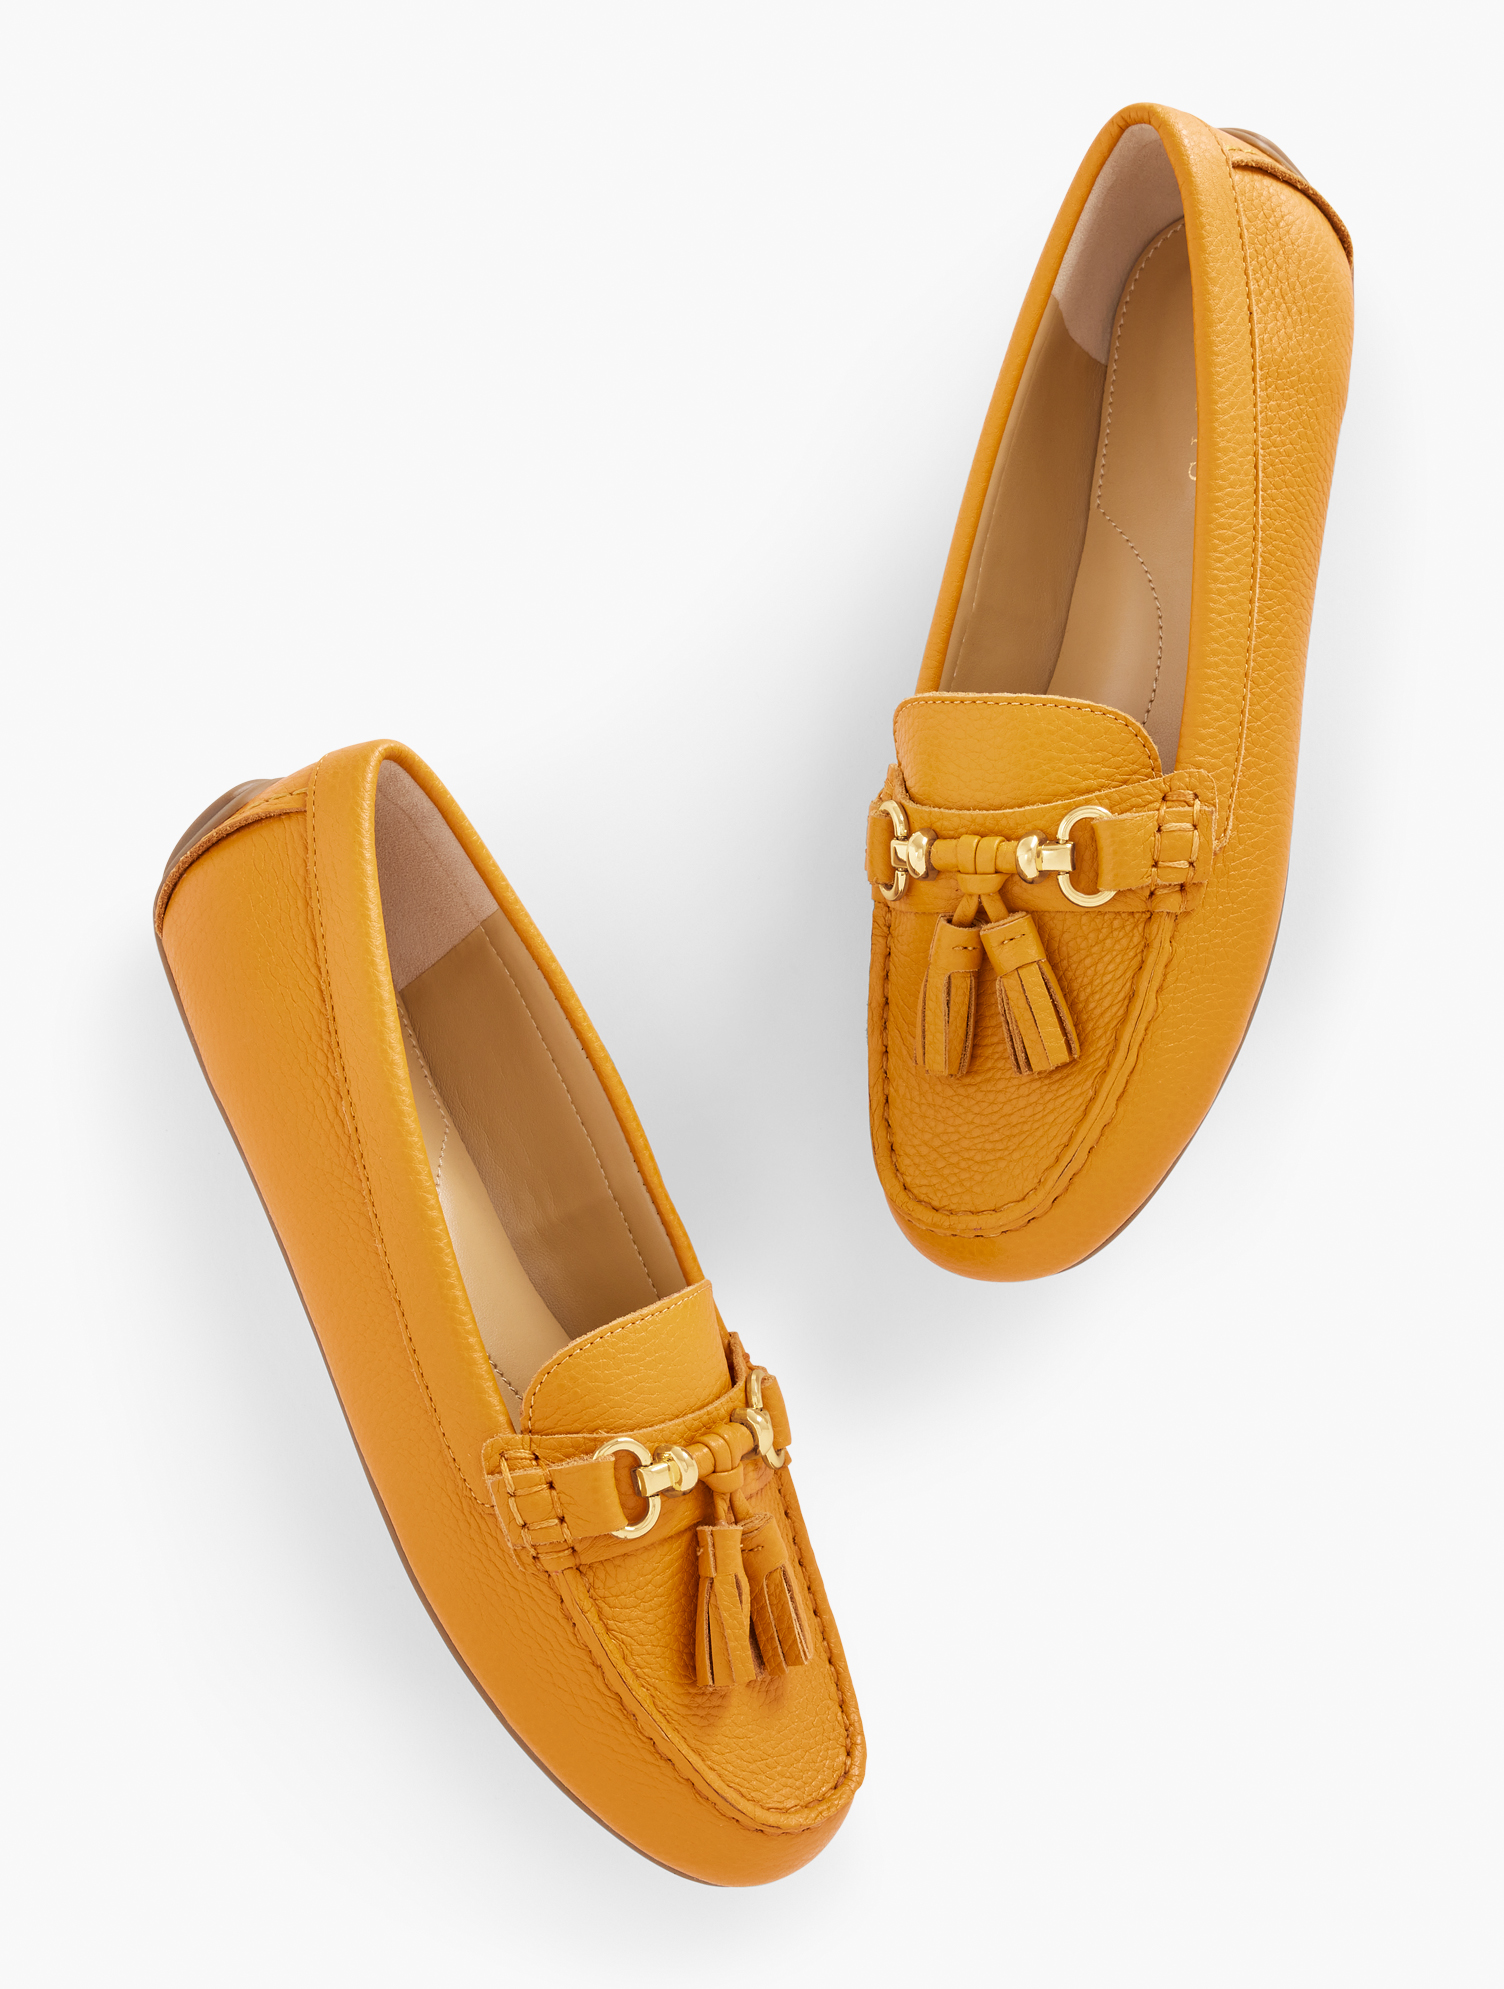 Talbots Everson Tassel Driving Moccasins Shoes - Leather - Golden Maize - 11m